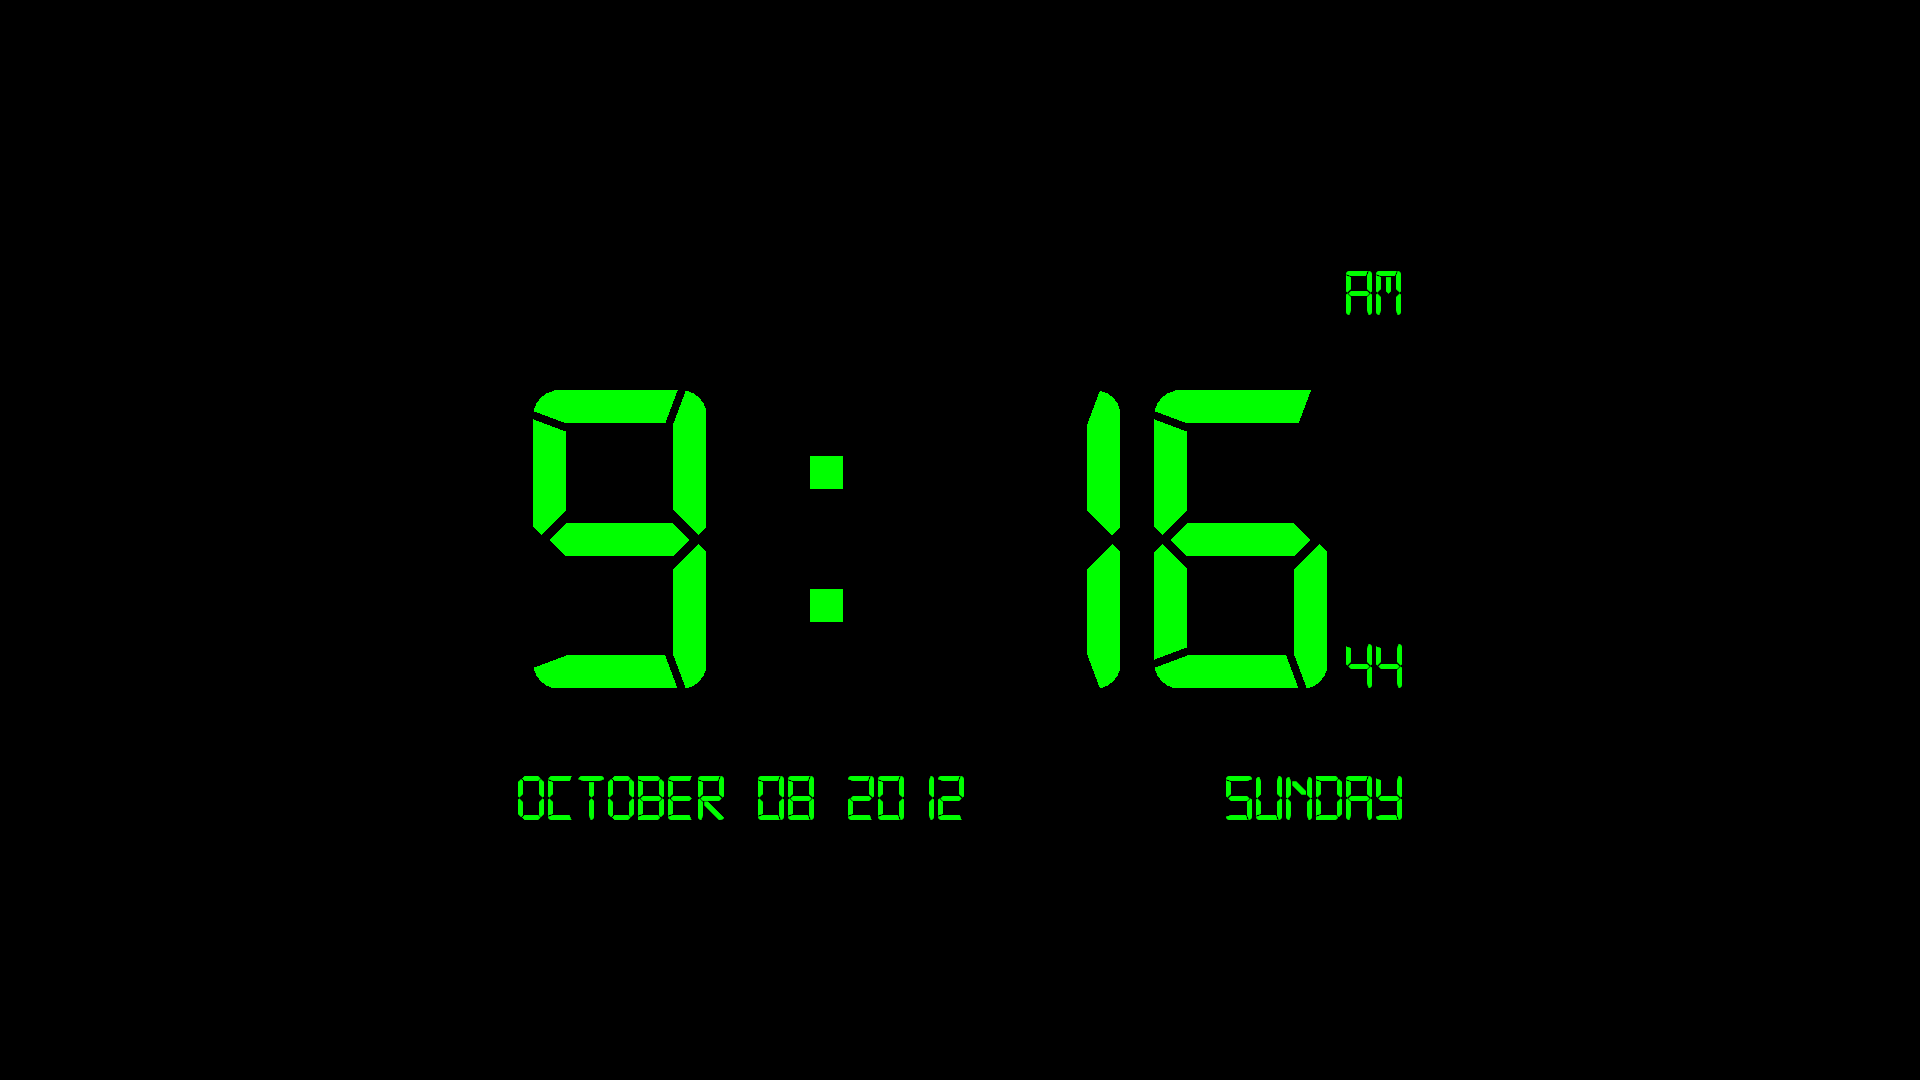 Digital Clock Live Wallpaper:Amazon.co.uk:Appstore for Android